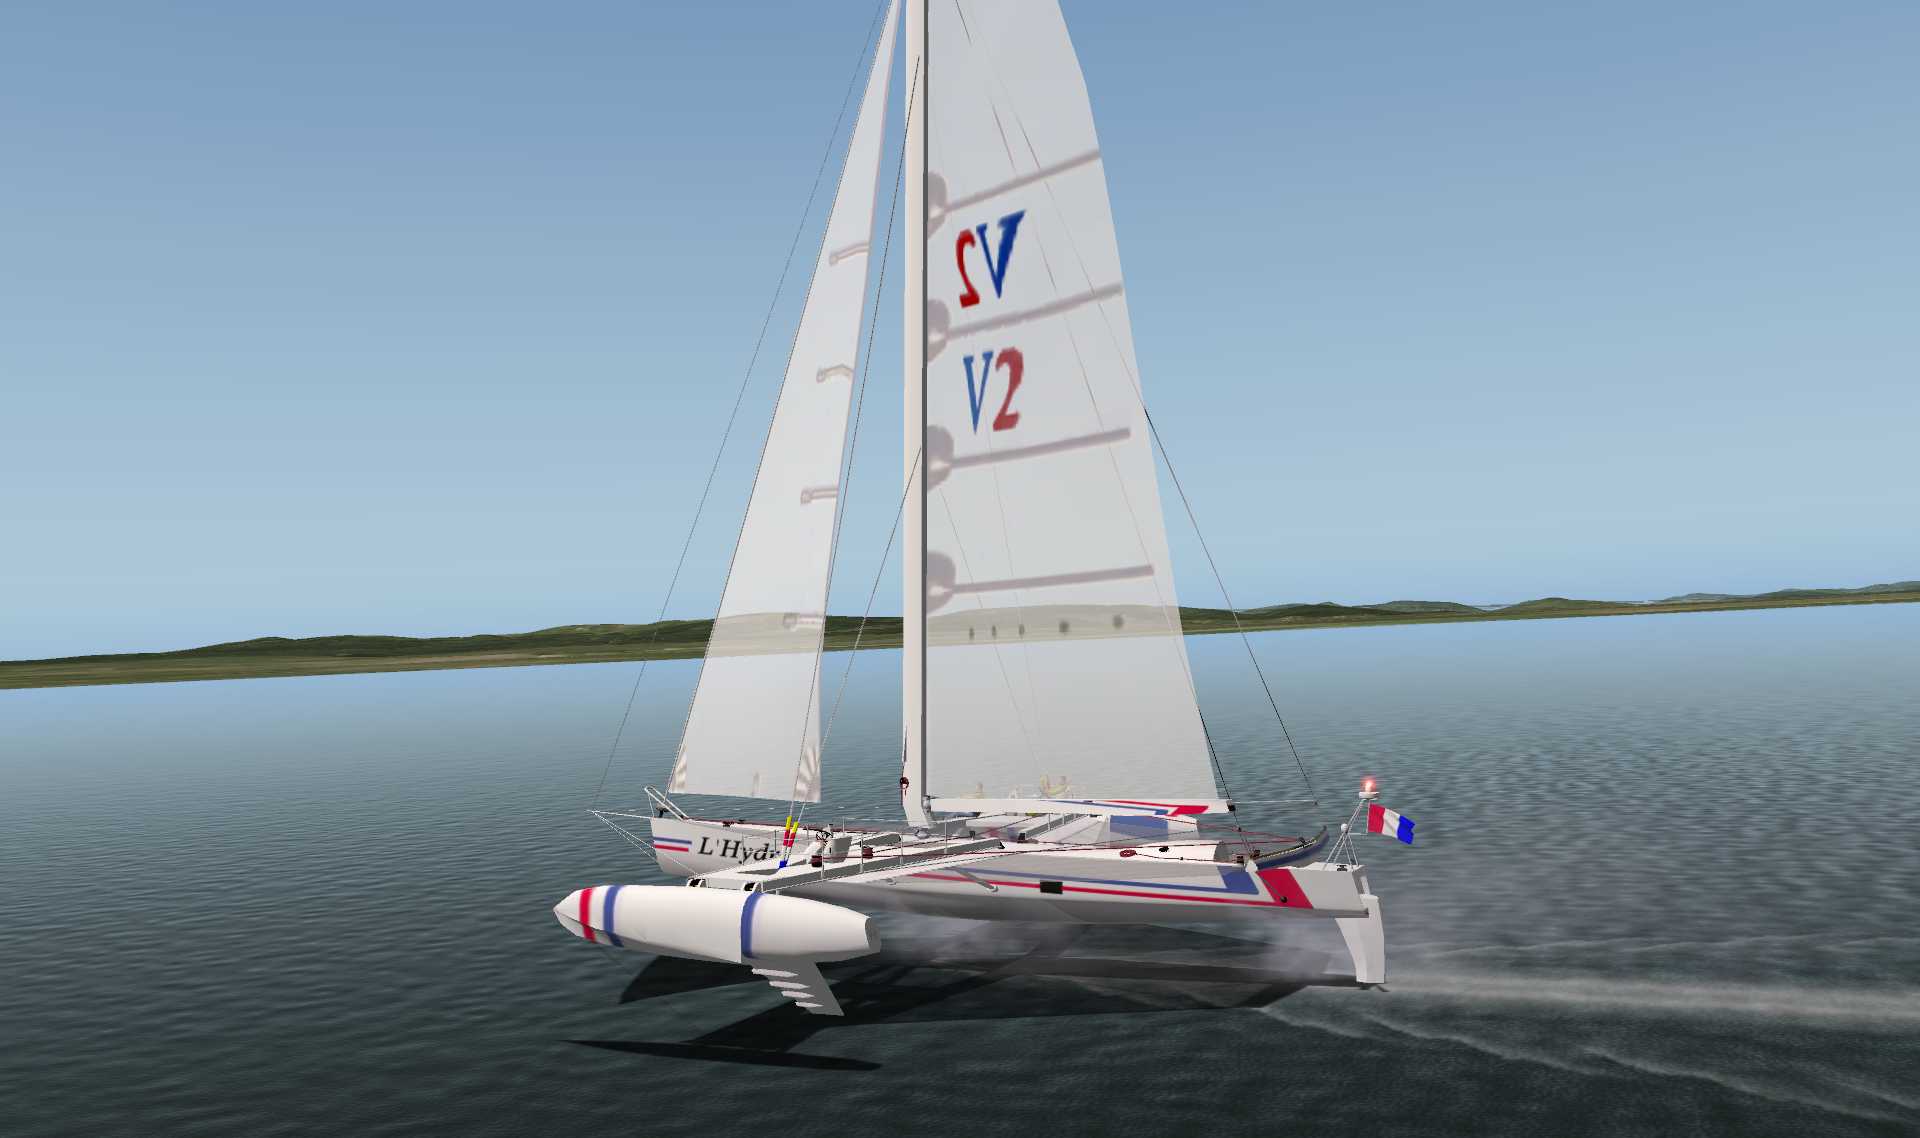 DOWNLOAD Hydroptere v2 The flying boat X-Plane 10 - Rikoooo